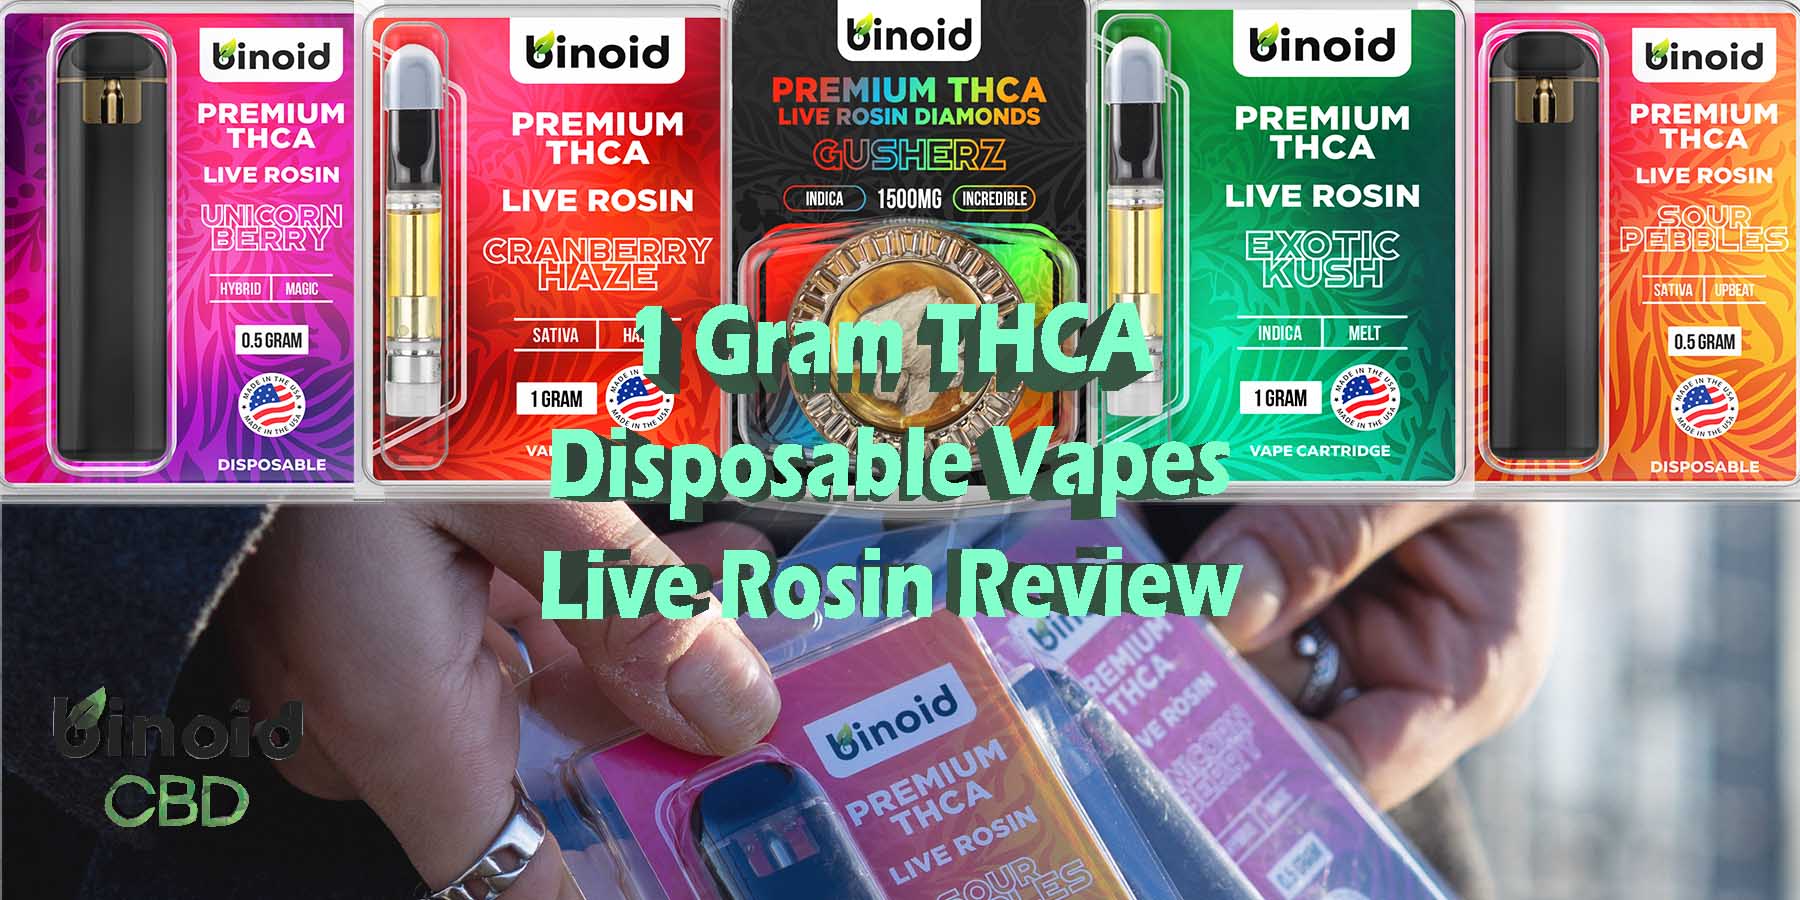 1 Gram THCA Disposable Vapes Live Rosin Review Strongest Get Near Me How To Get Online Quality Legal For Sale 1gram 2gram Binoid